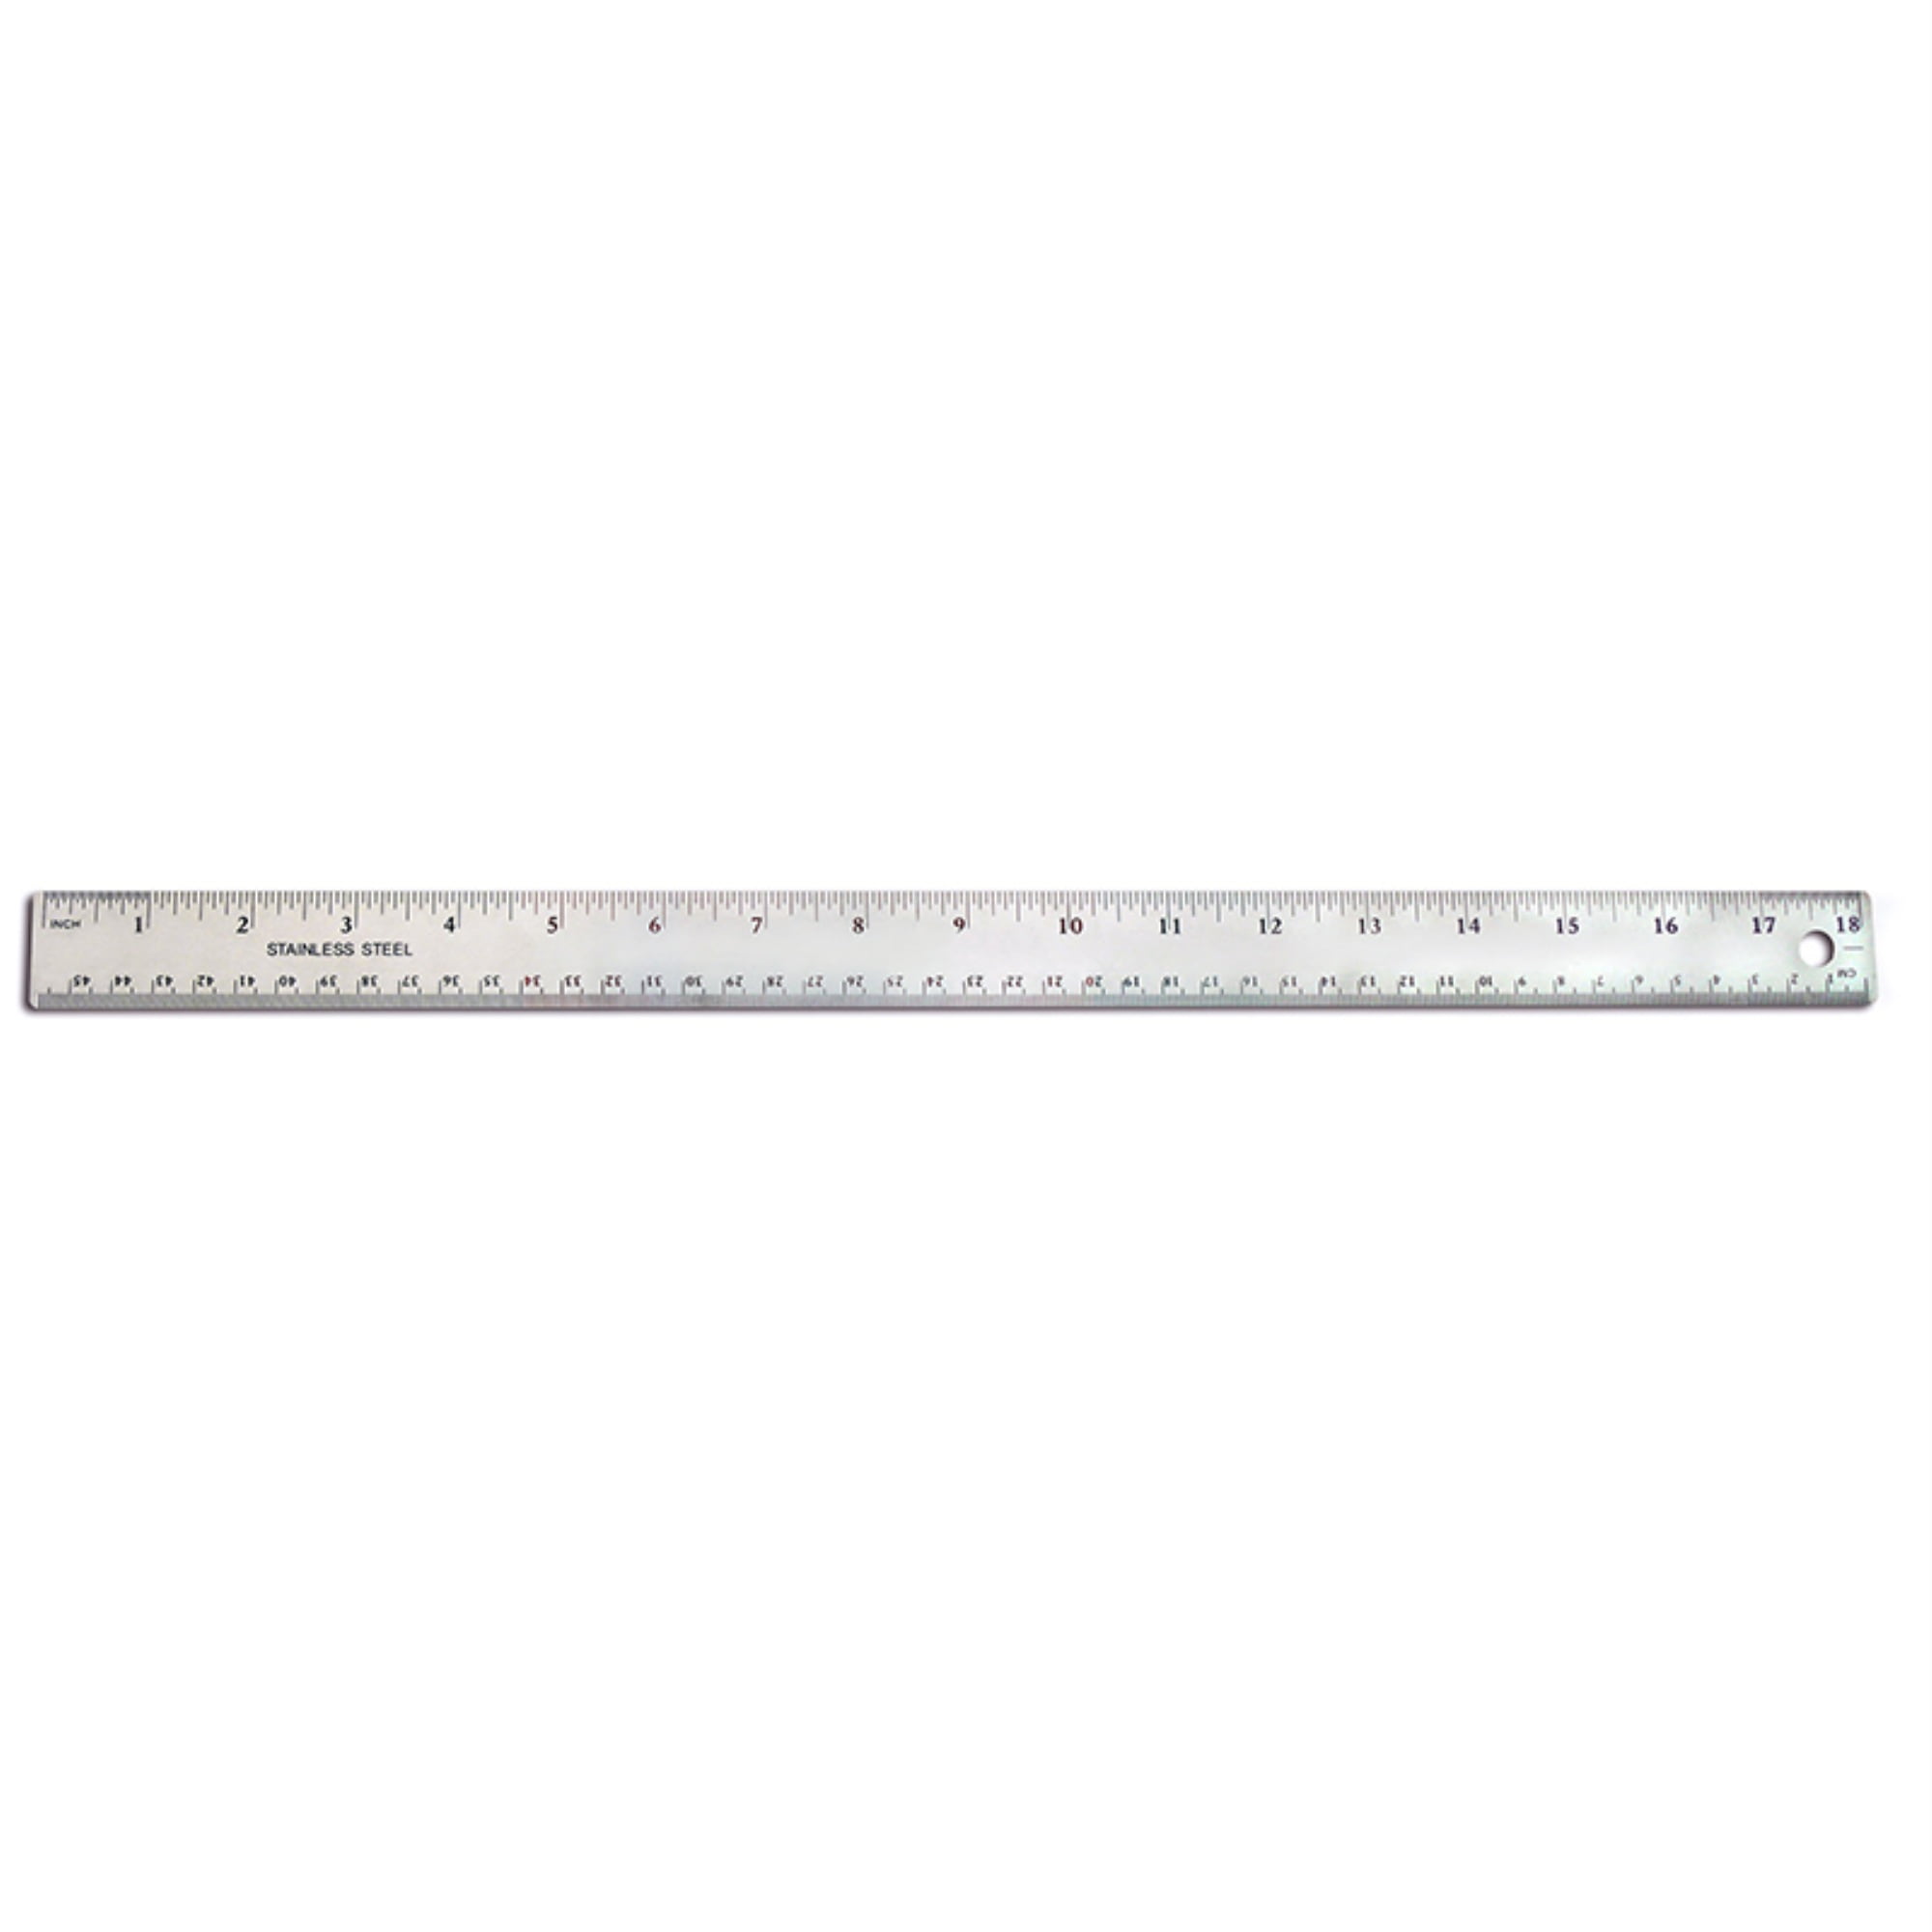 The Pencil Grip 18 Stainless Steel Ruler (TPG158) 